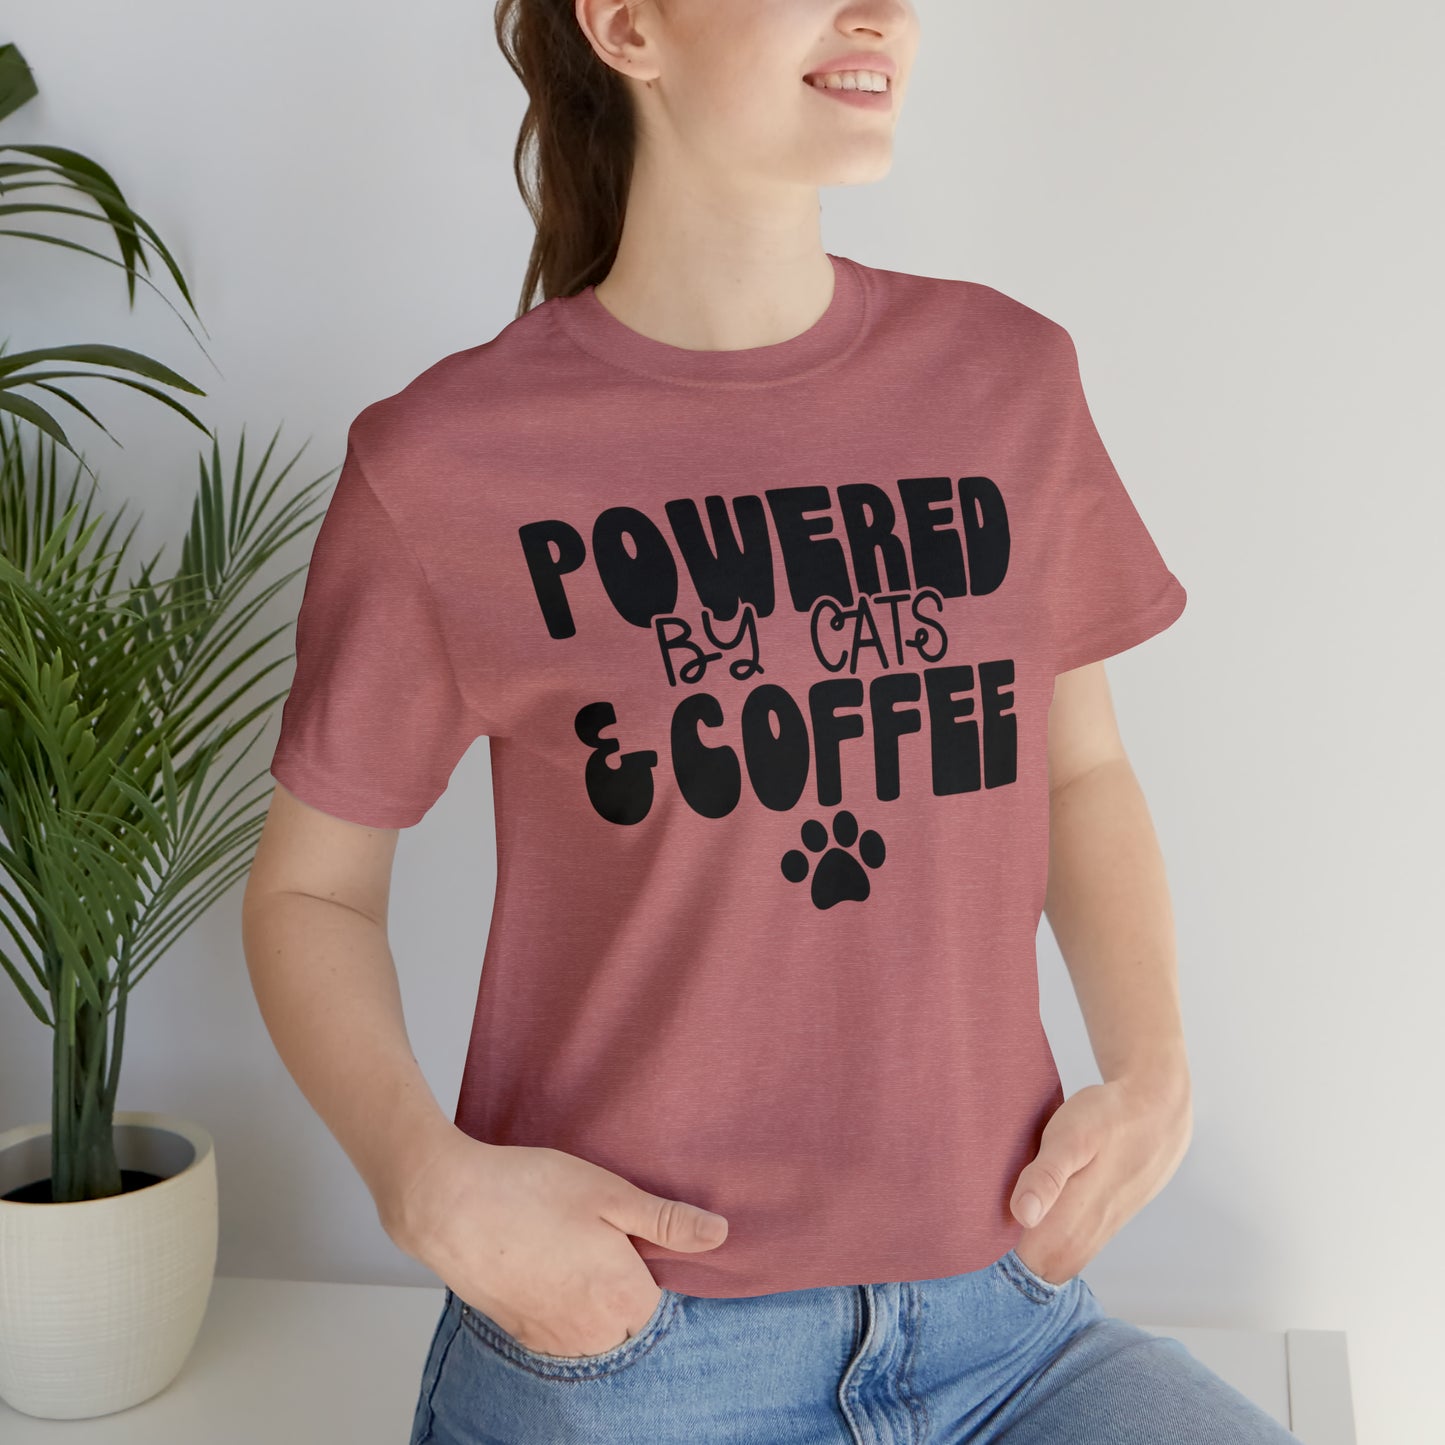 Powered by Cats & Coffee Short Sleeve T-shirt